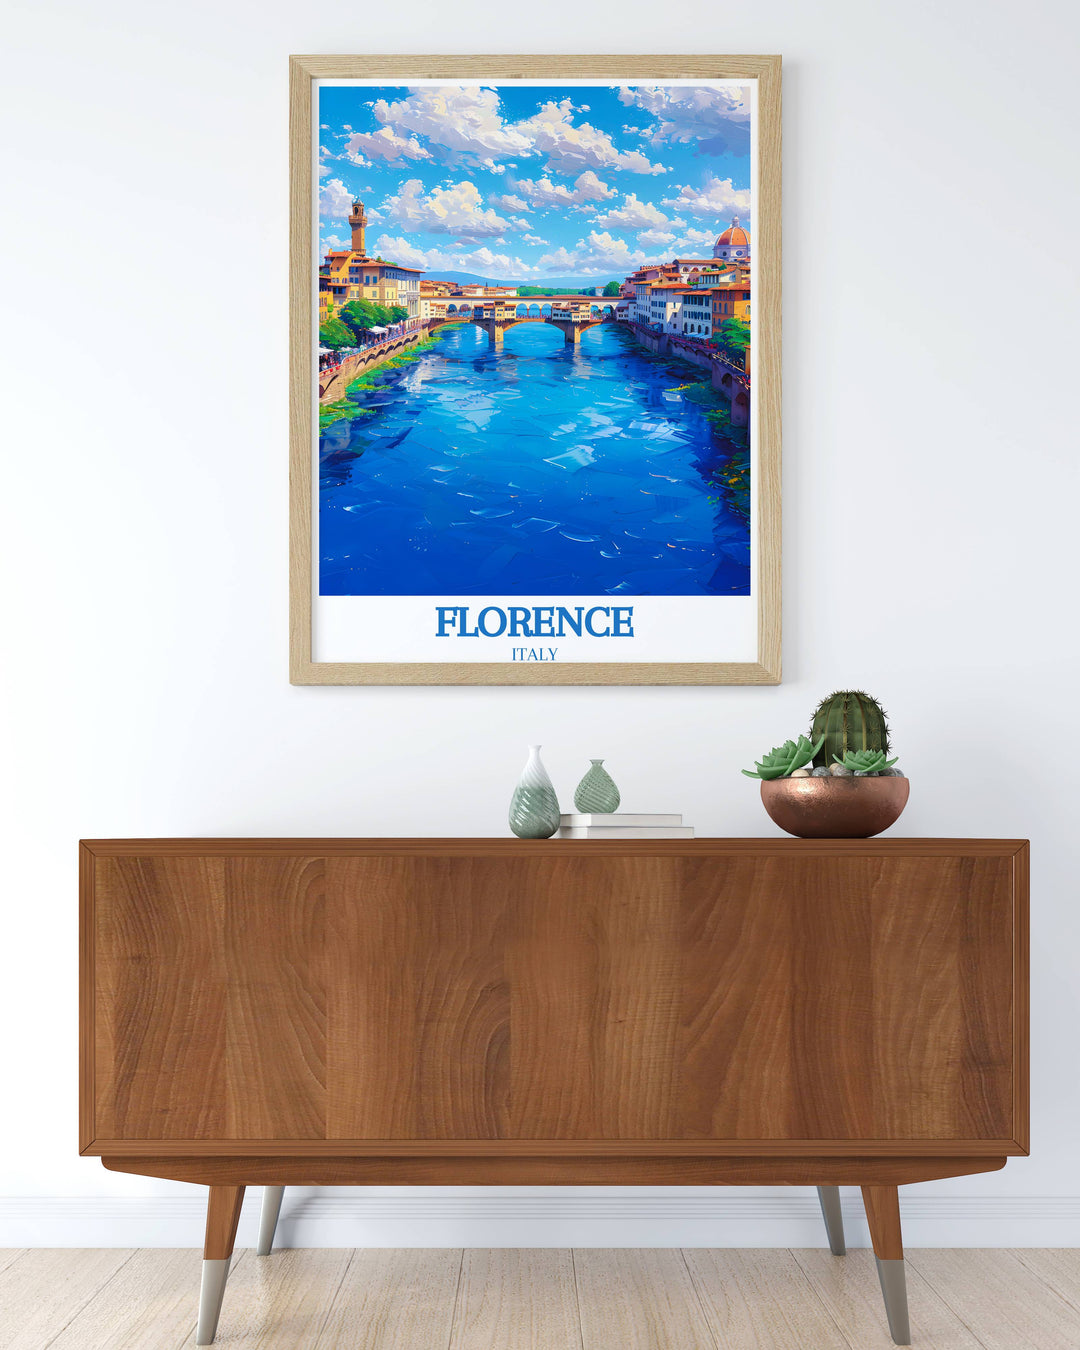 Wall Art Print of Florence Italy presenting the picturesque landscapes and architectural marvels of the city a sophisticated addition to any art collection